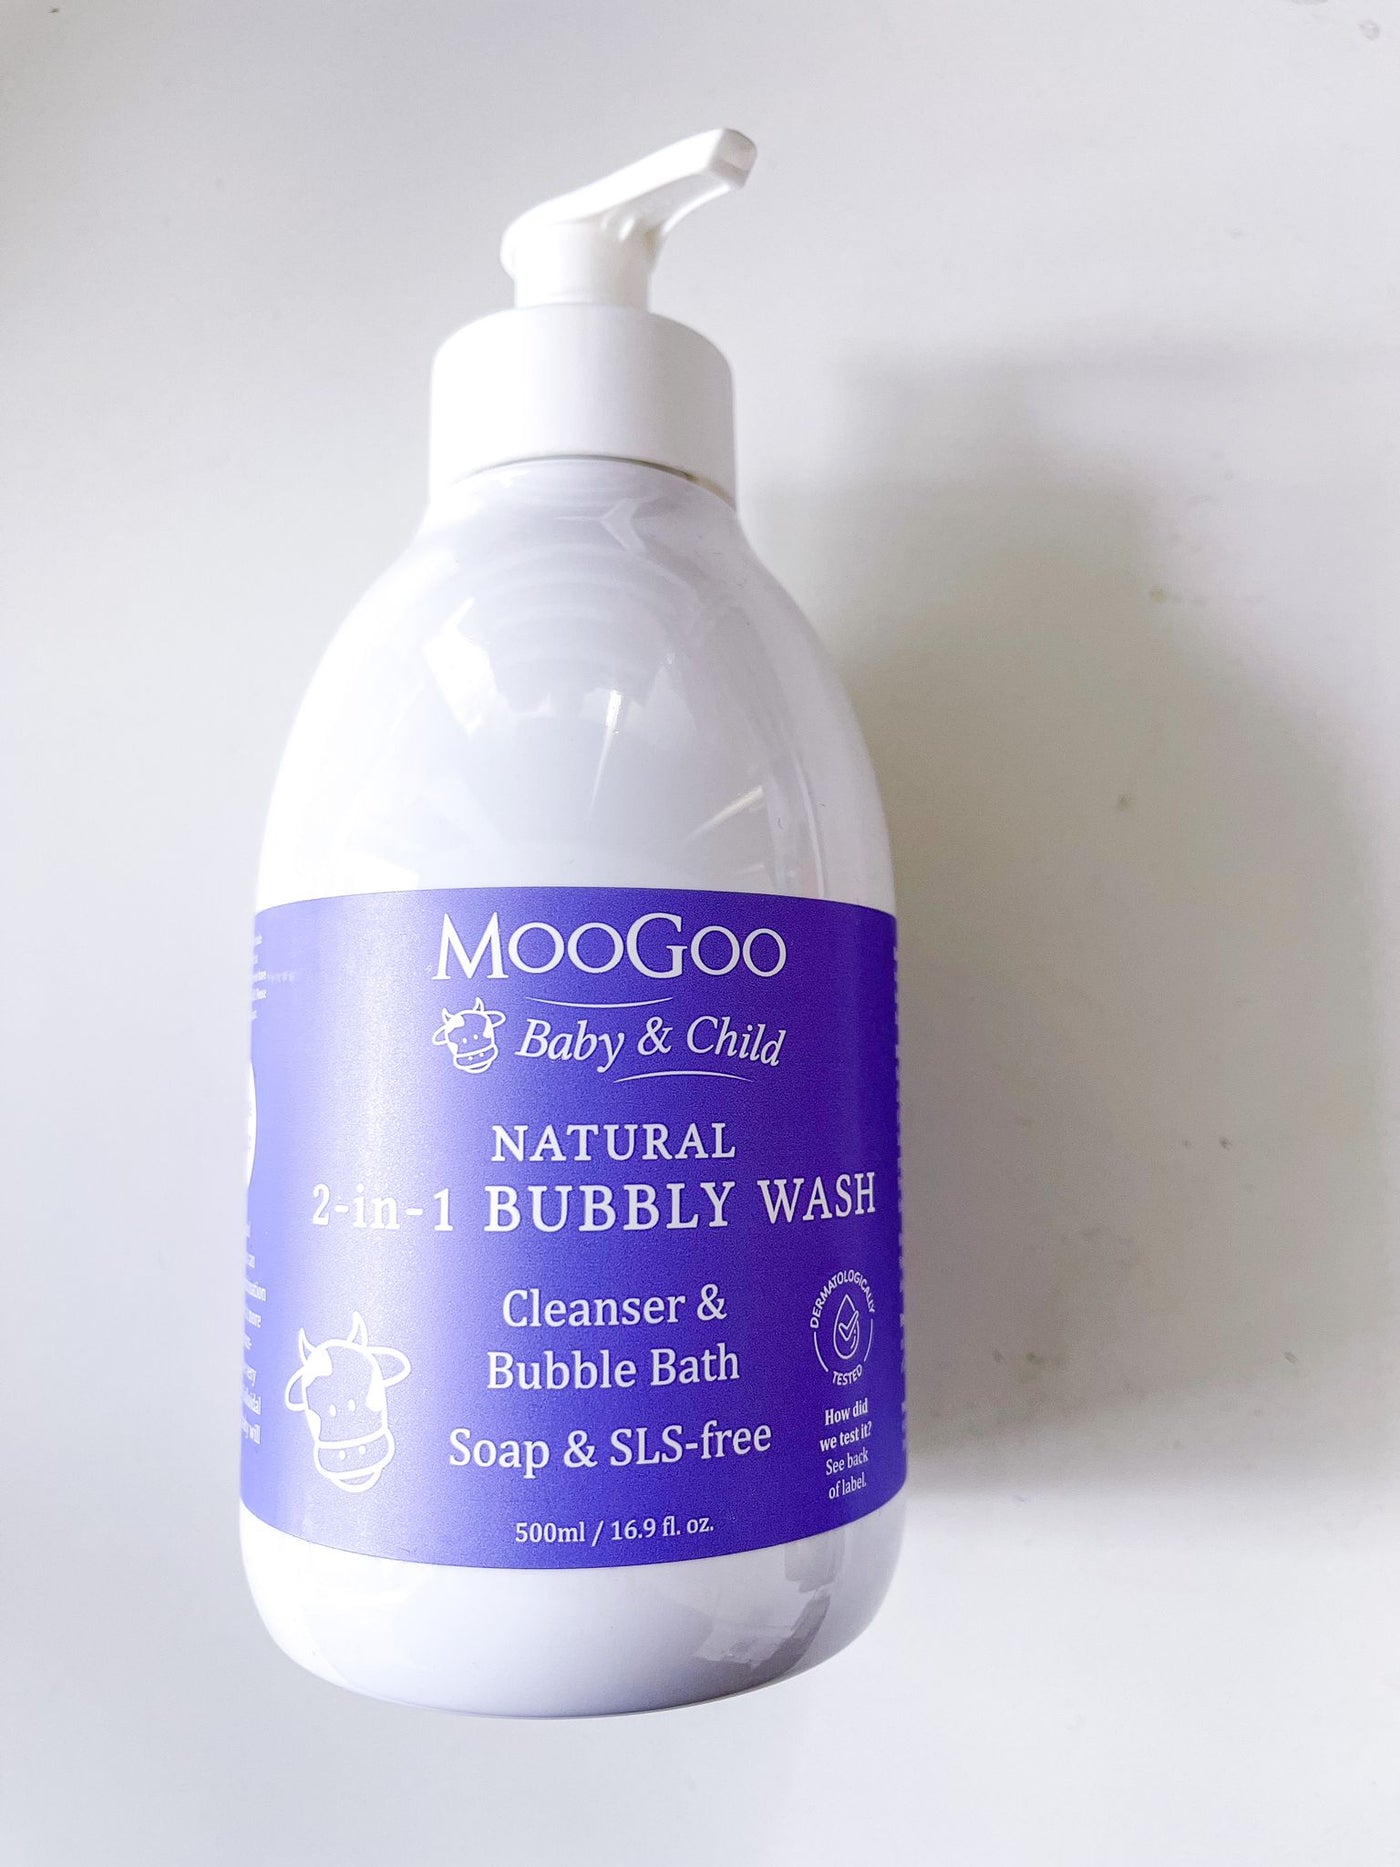 MooGoo Baby & Child Natural 2-in-1 Bubbly Wash